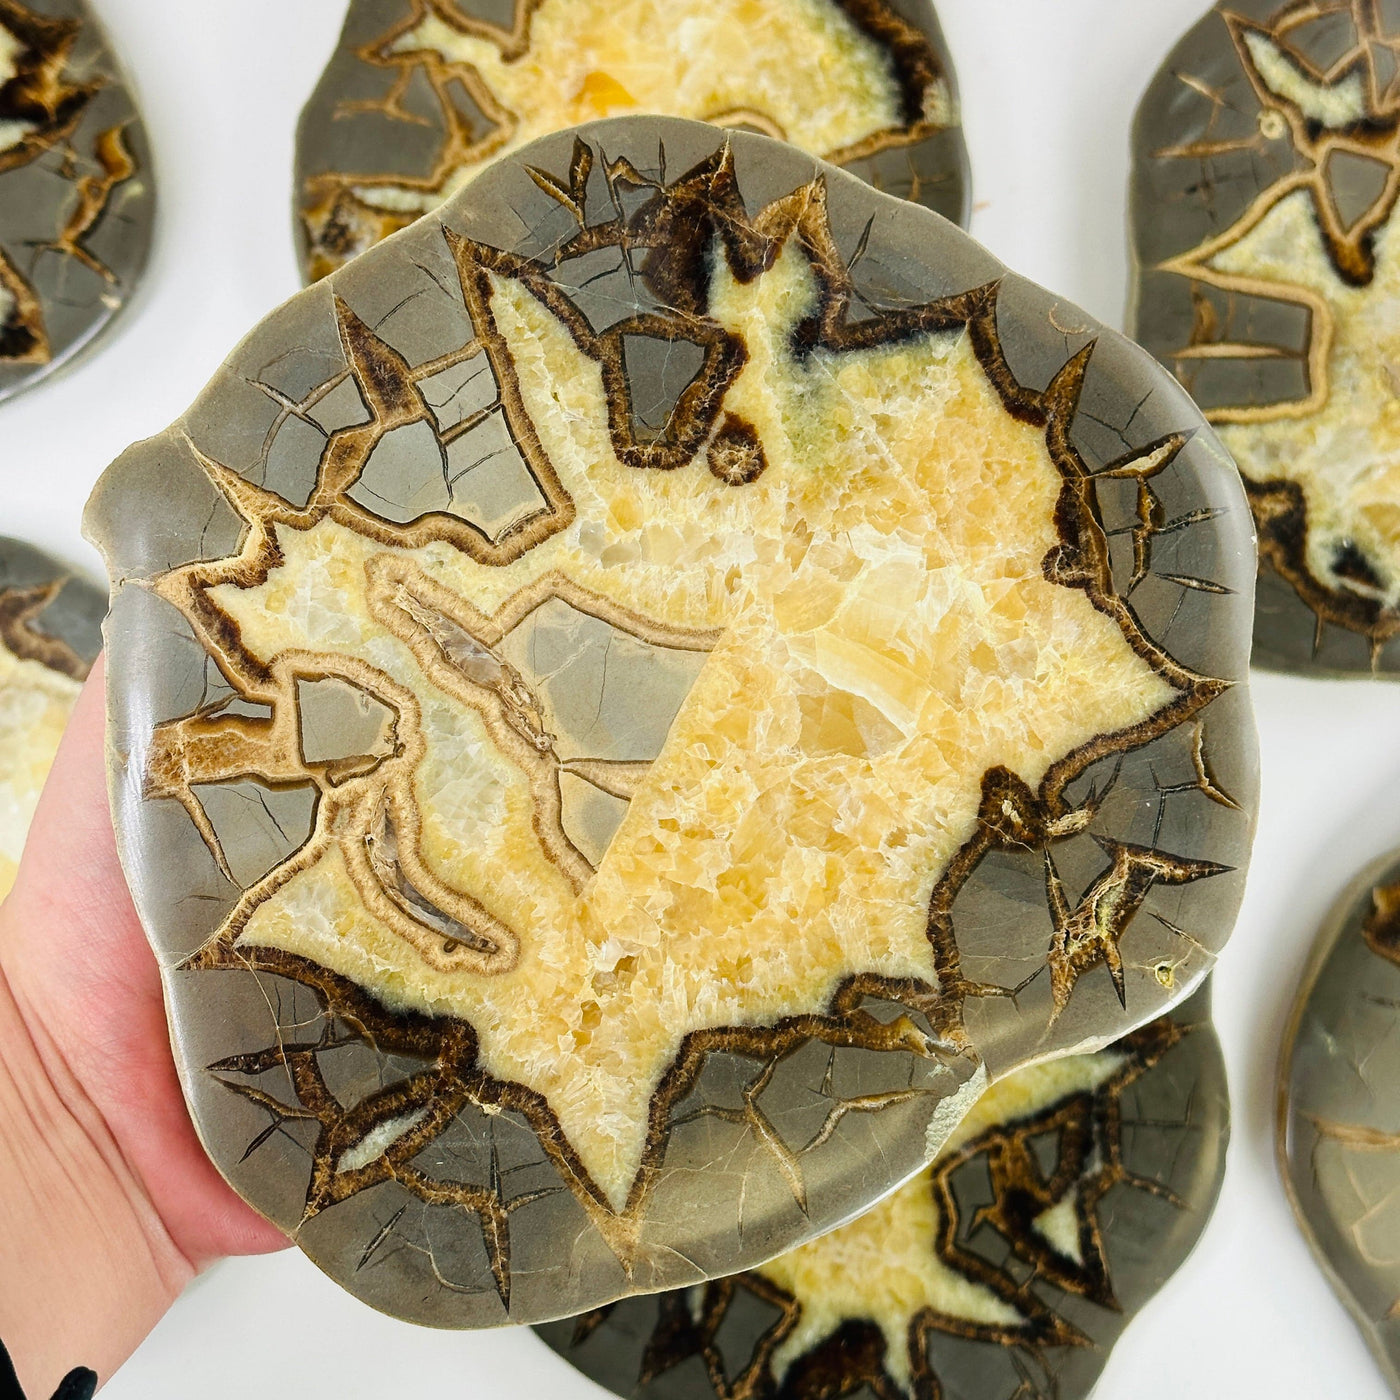 septarian coaster with decorations in the background